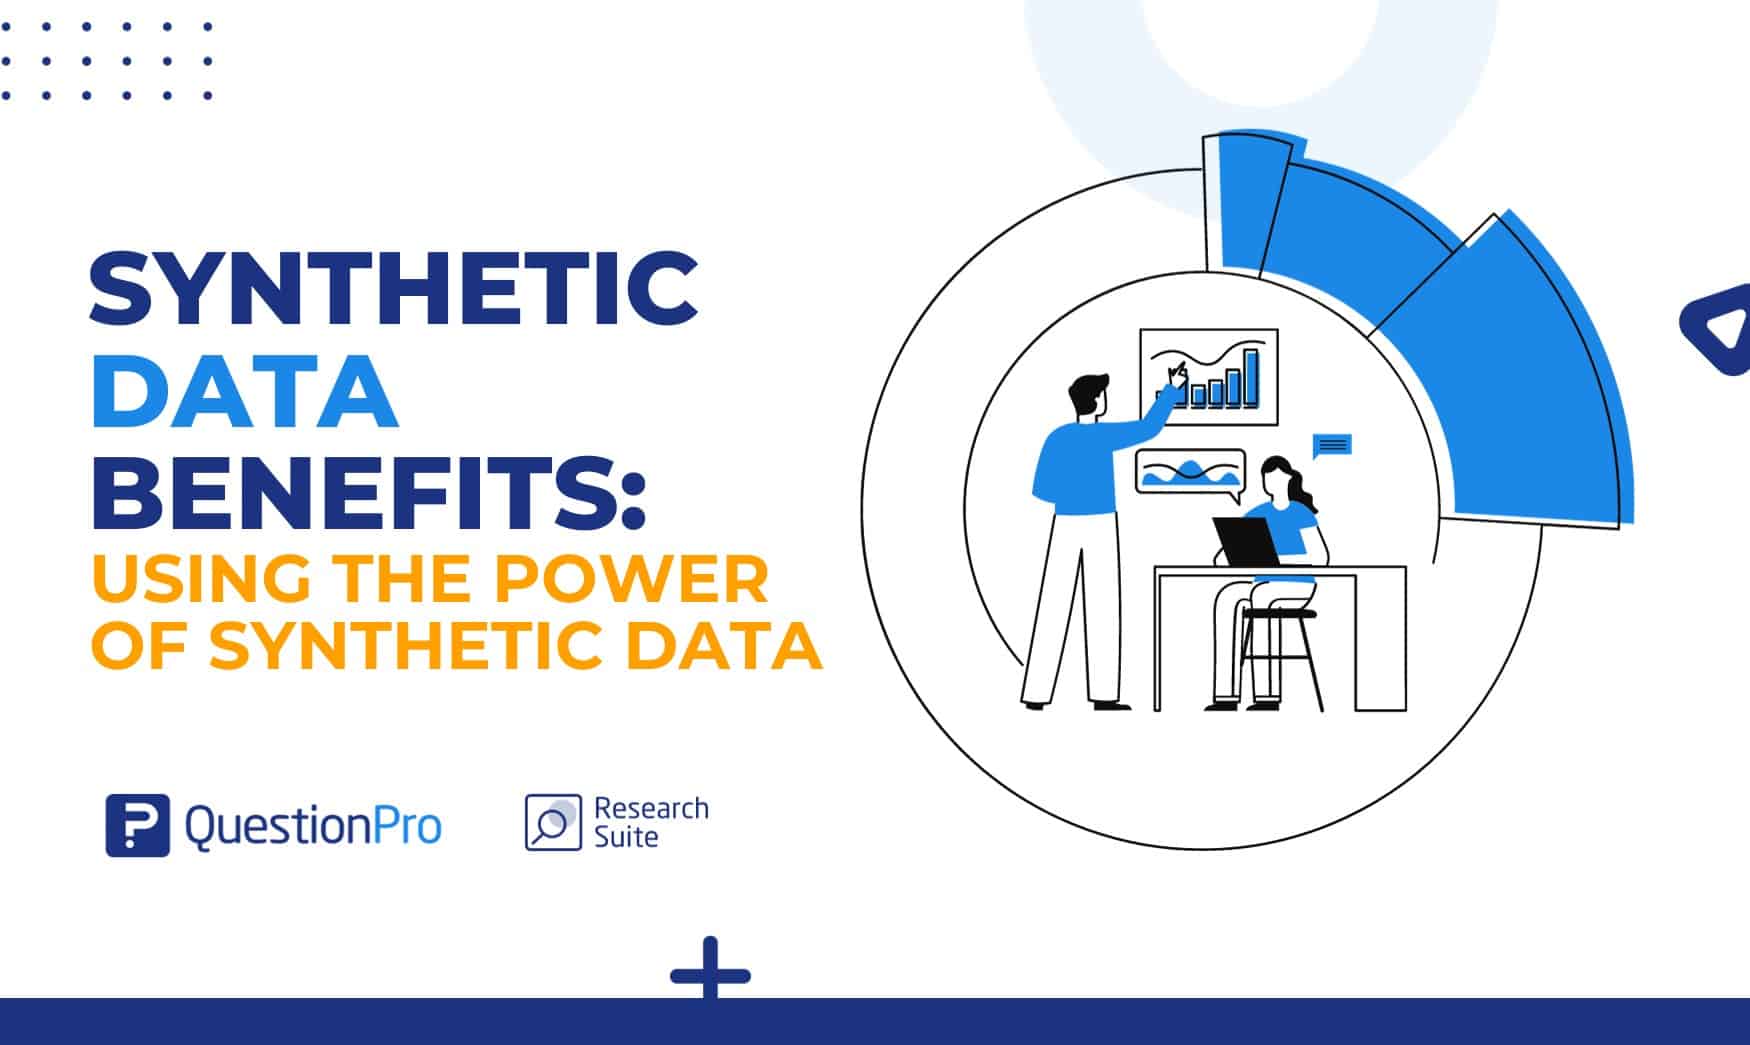 Discover the immense power of synthetic data benefits. Learn how synthetic data transforms industries and how to maximize its benefits.